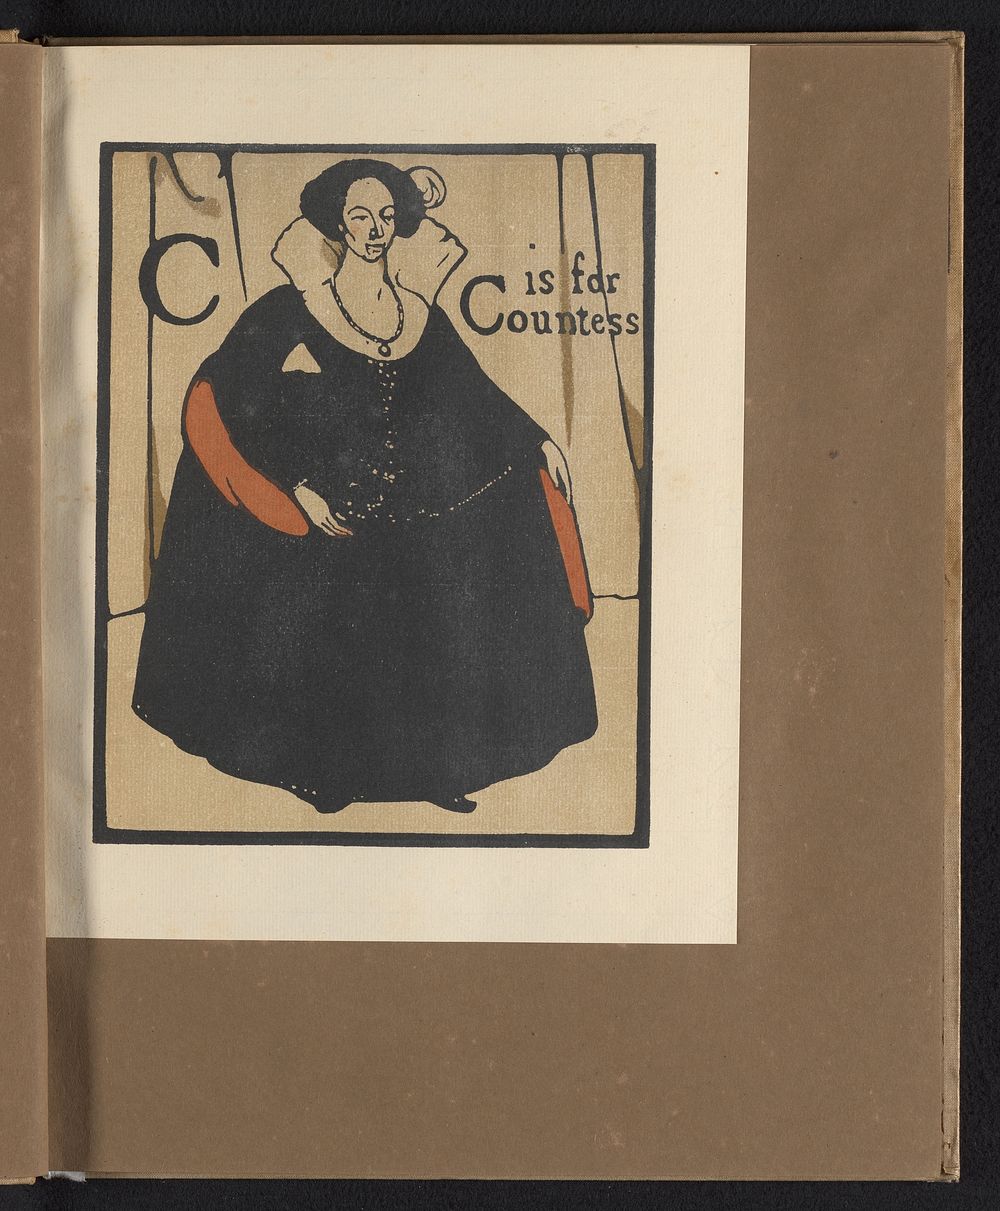 C is for Countess (1898) by William Nicholson and William Heinemann